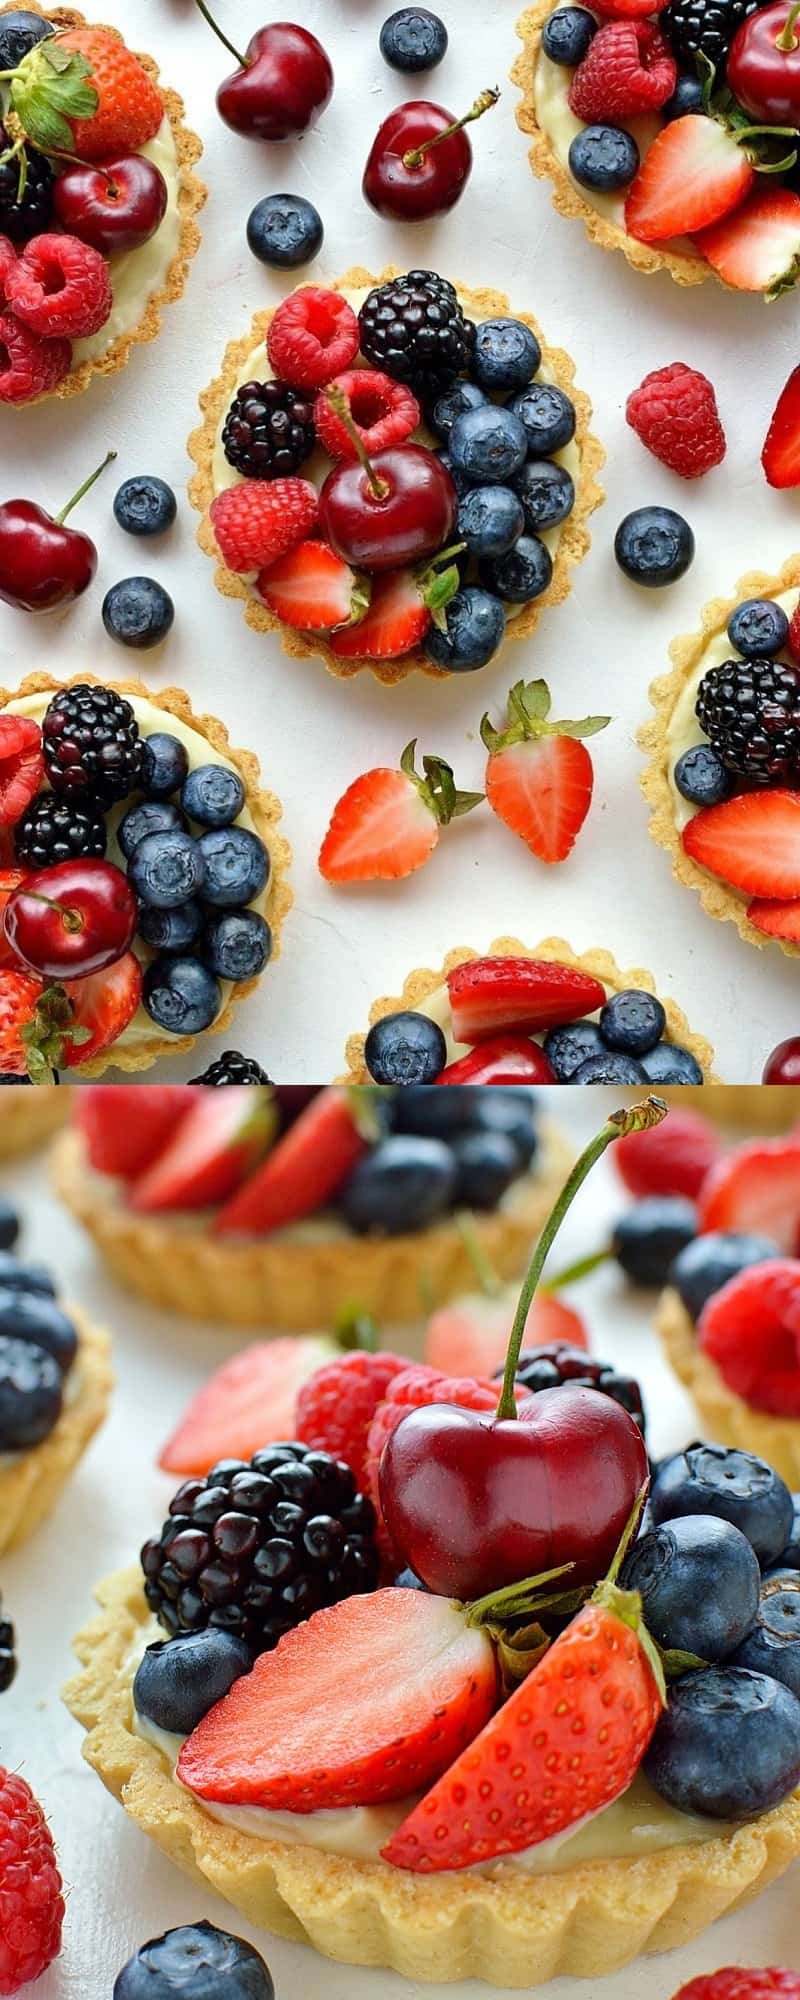 Coconut and berry fruit tarts - crisp coconut pastry with coconut pastry cream and fresh berries.